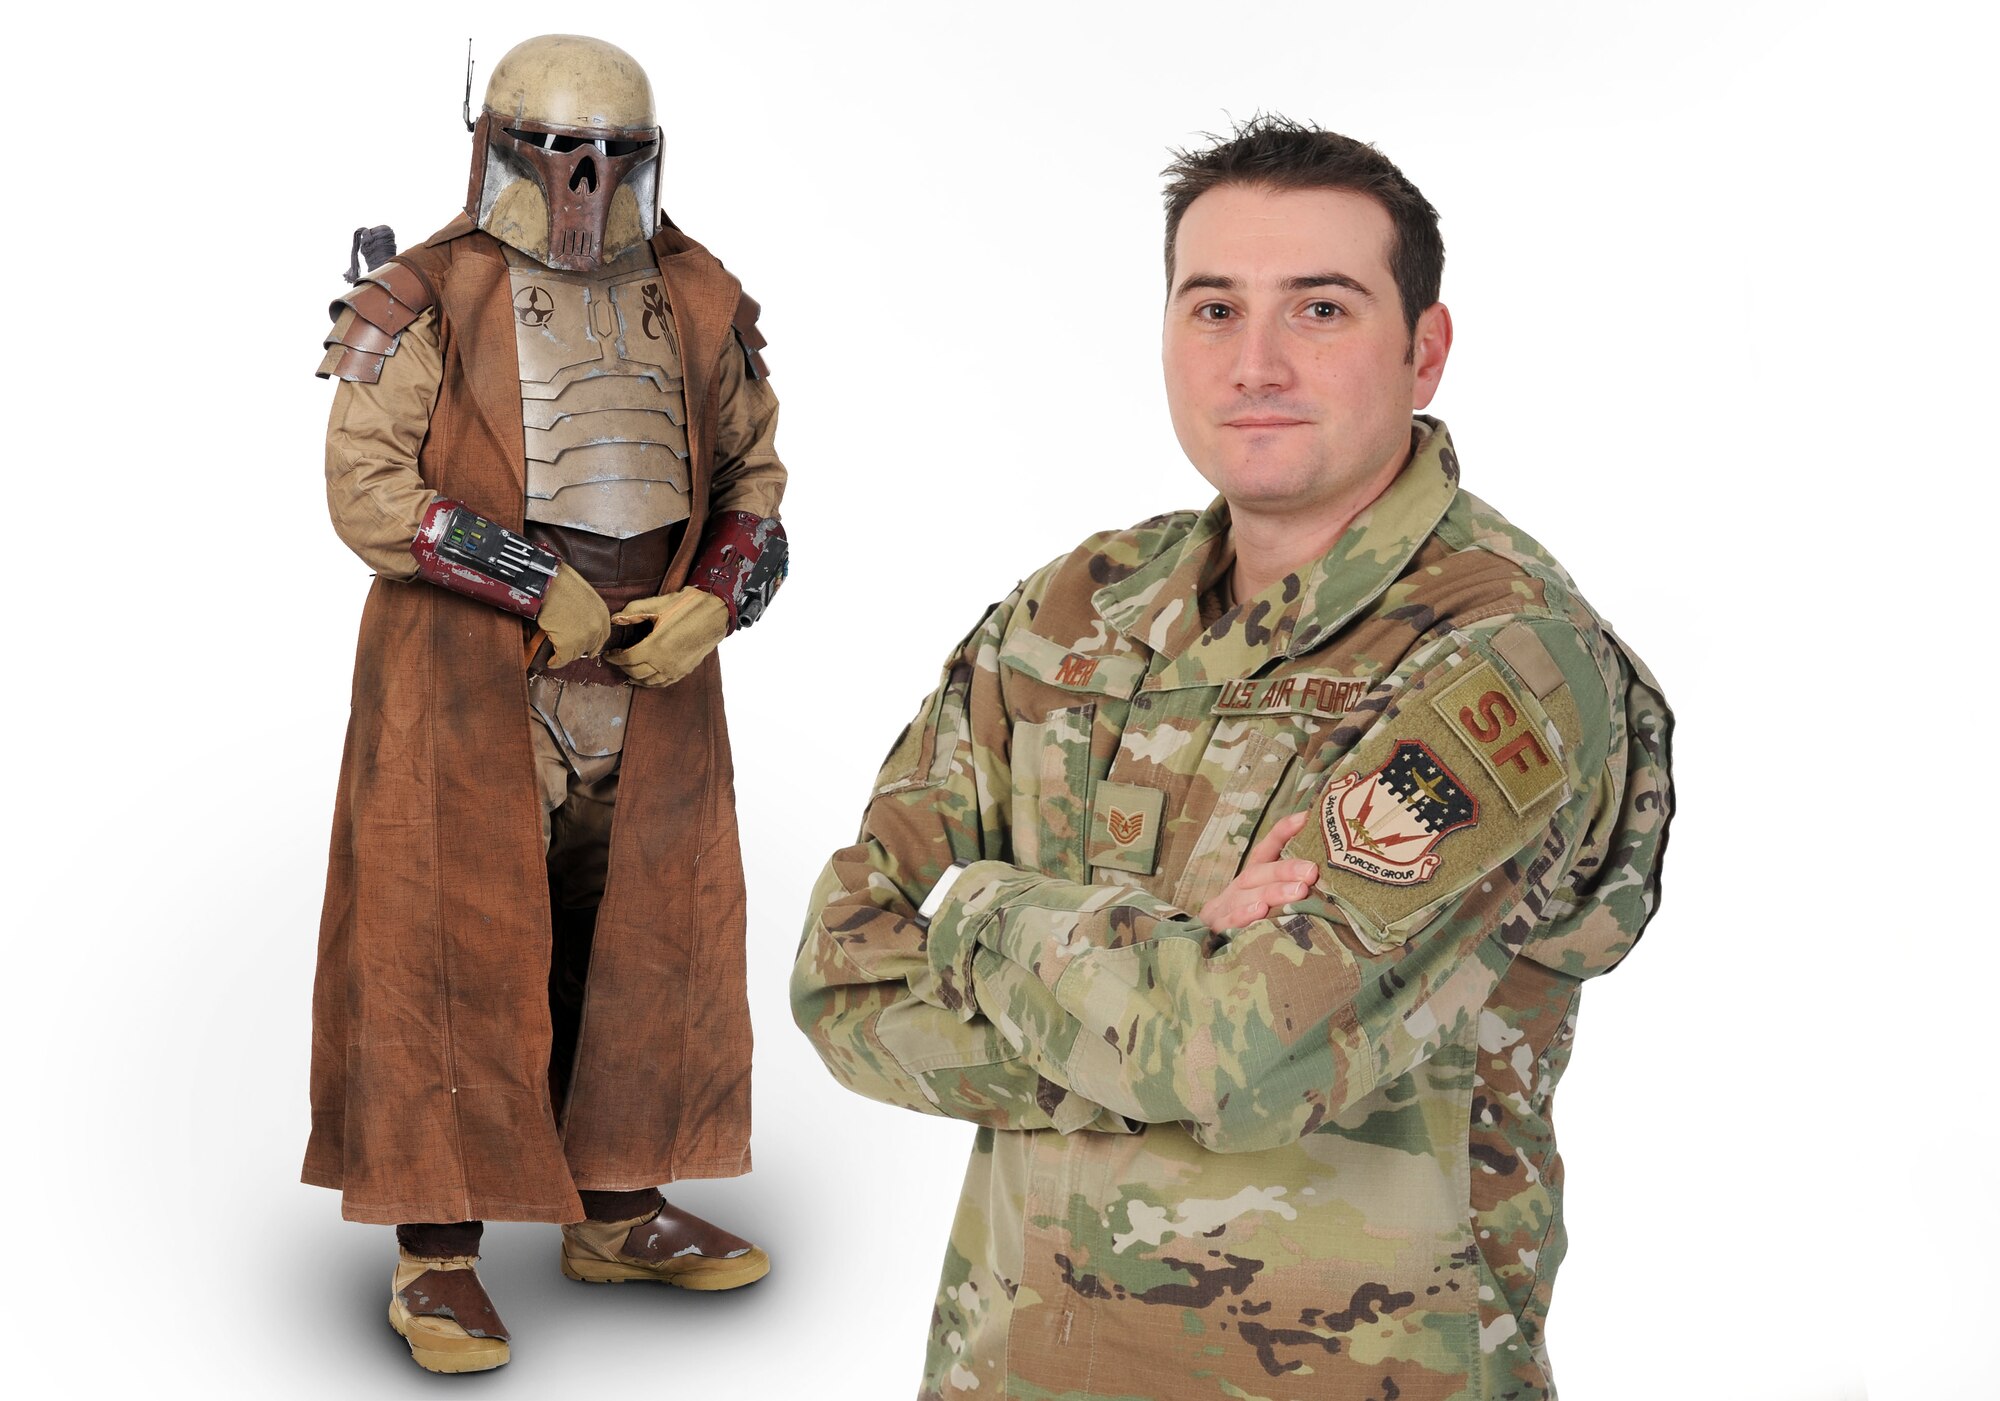 Tech. Sgt. Sean Neri, 341st Security Forces Support Squadron vehicle readiness center NCO-in charge, poses in his custom-made Mandalorian suit and in his Air Force uniform Jan. 15, 2020, at Malmstrom Air Force Base, Mont.